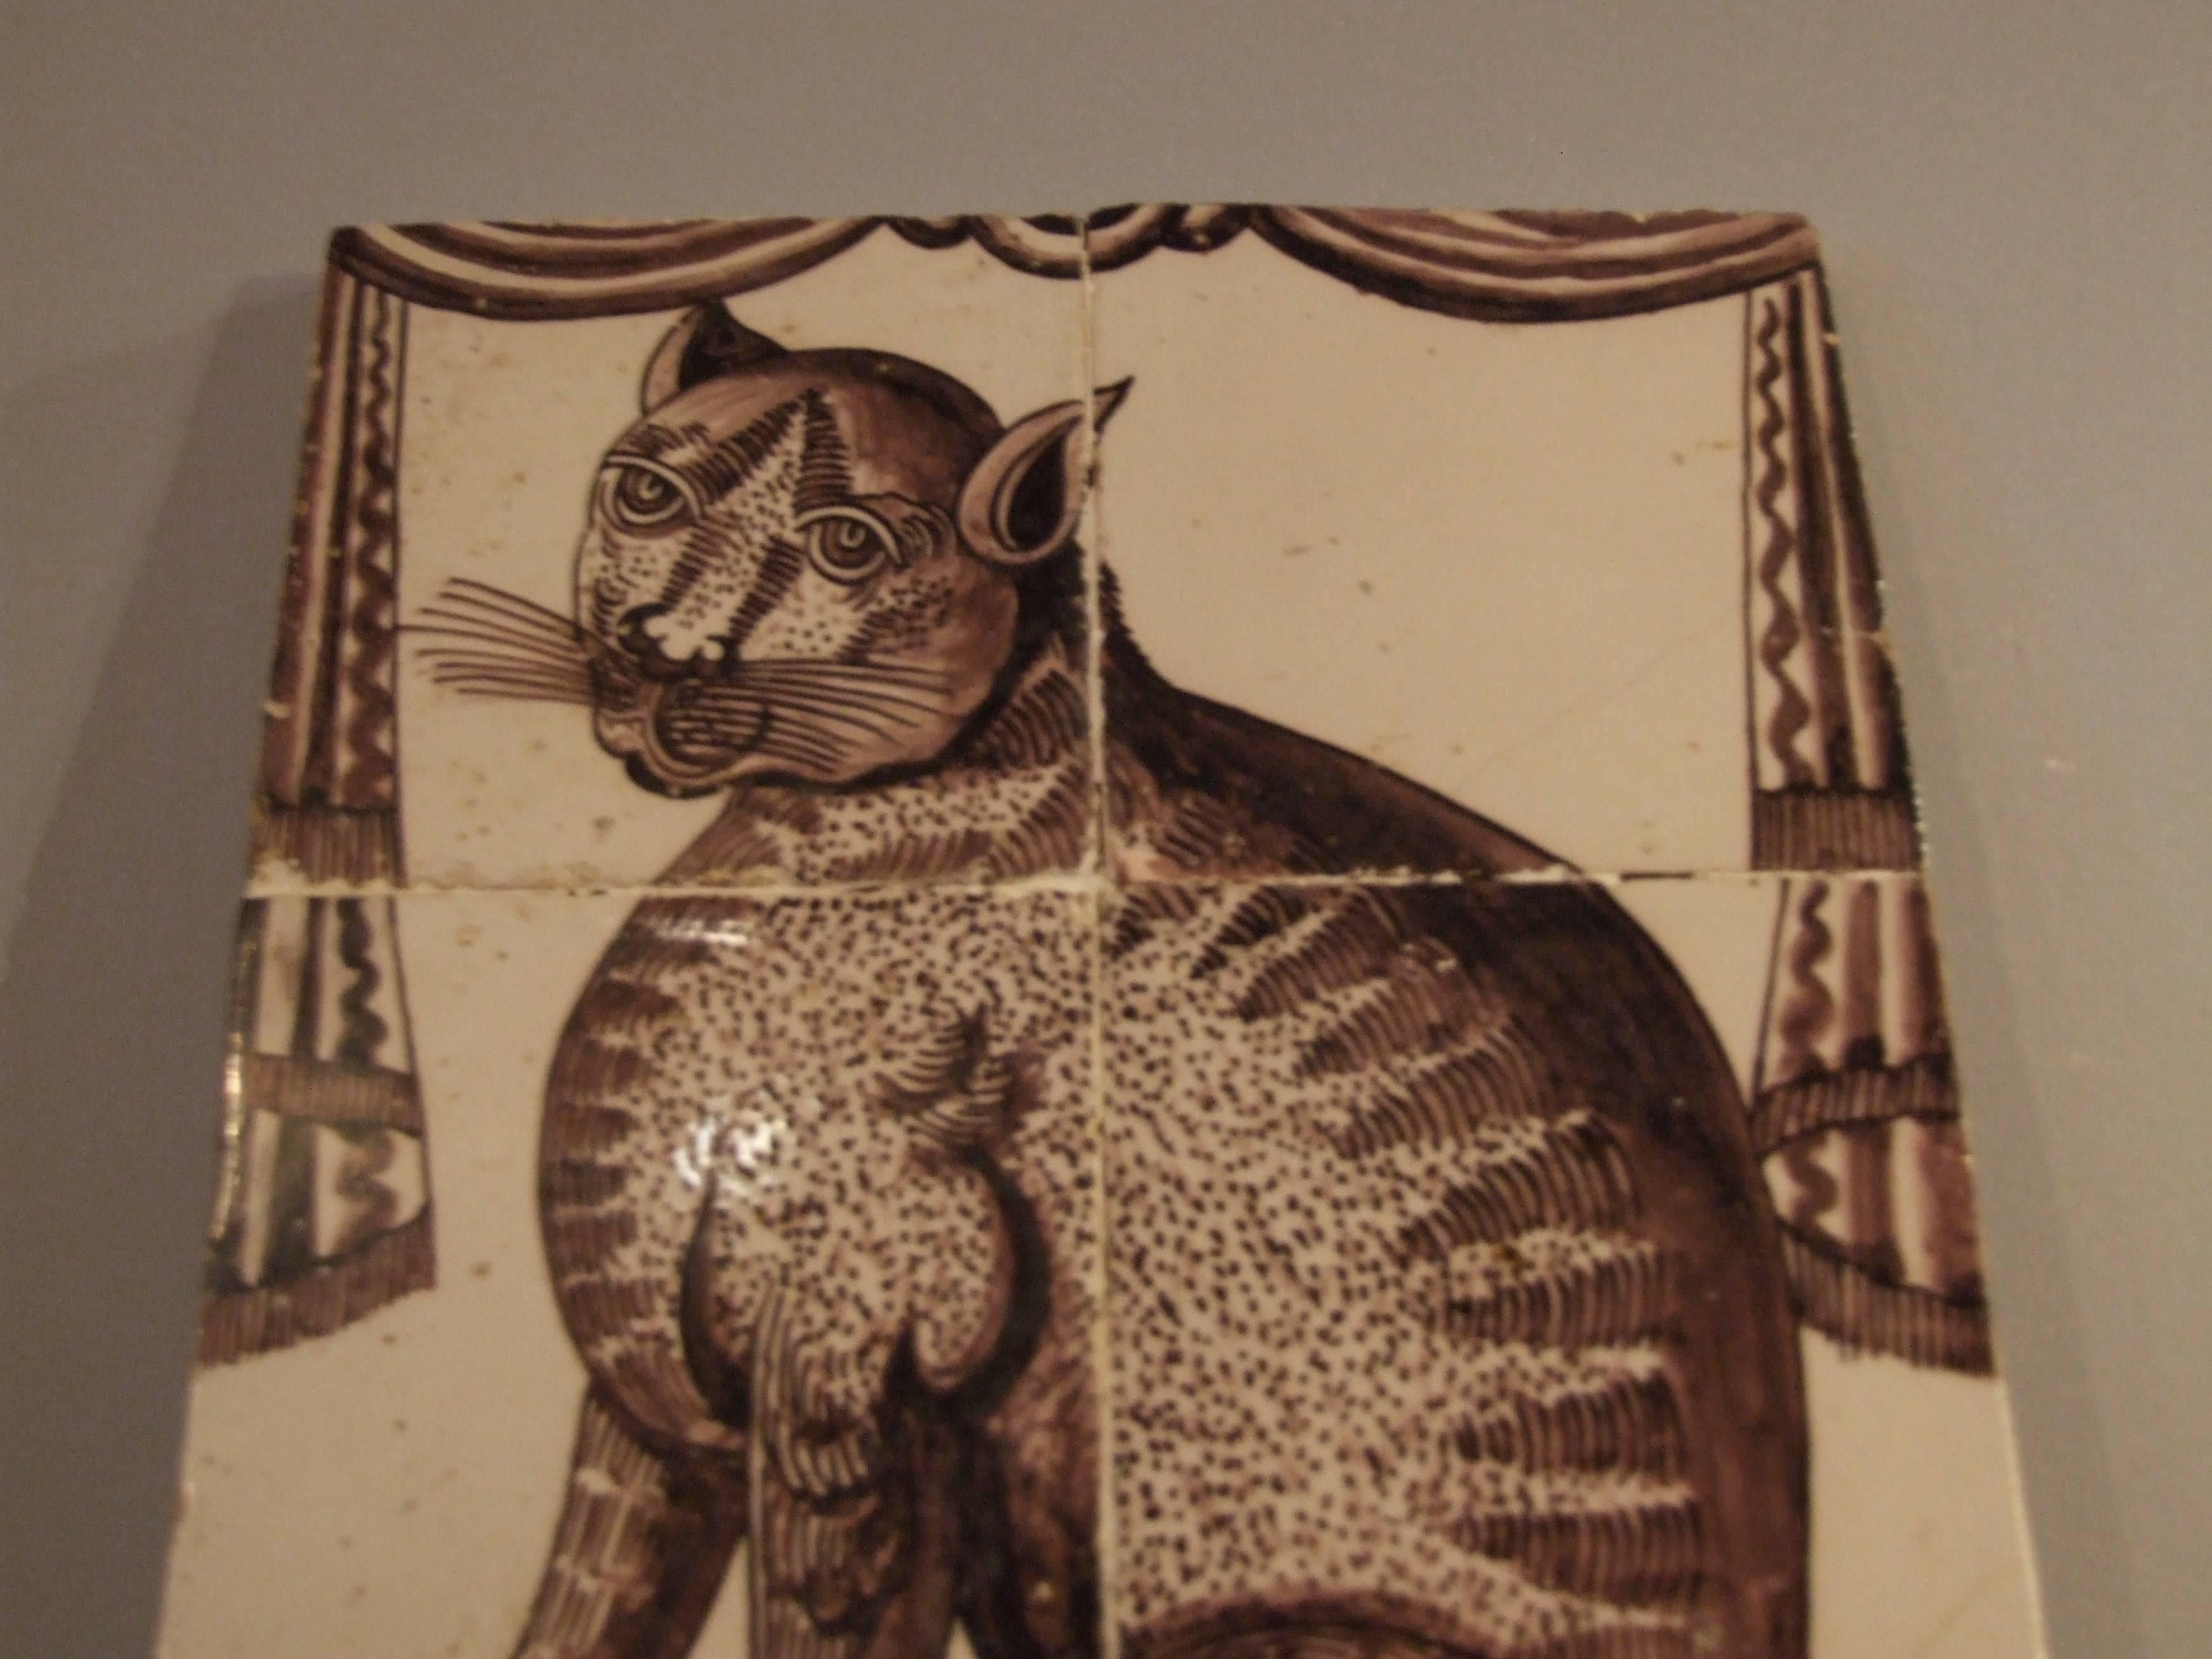 Unique and wonderful 18th Century delft tile picture of a two-tailed cat sitting on a tiled floor, framed by drapes.